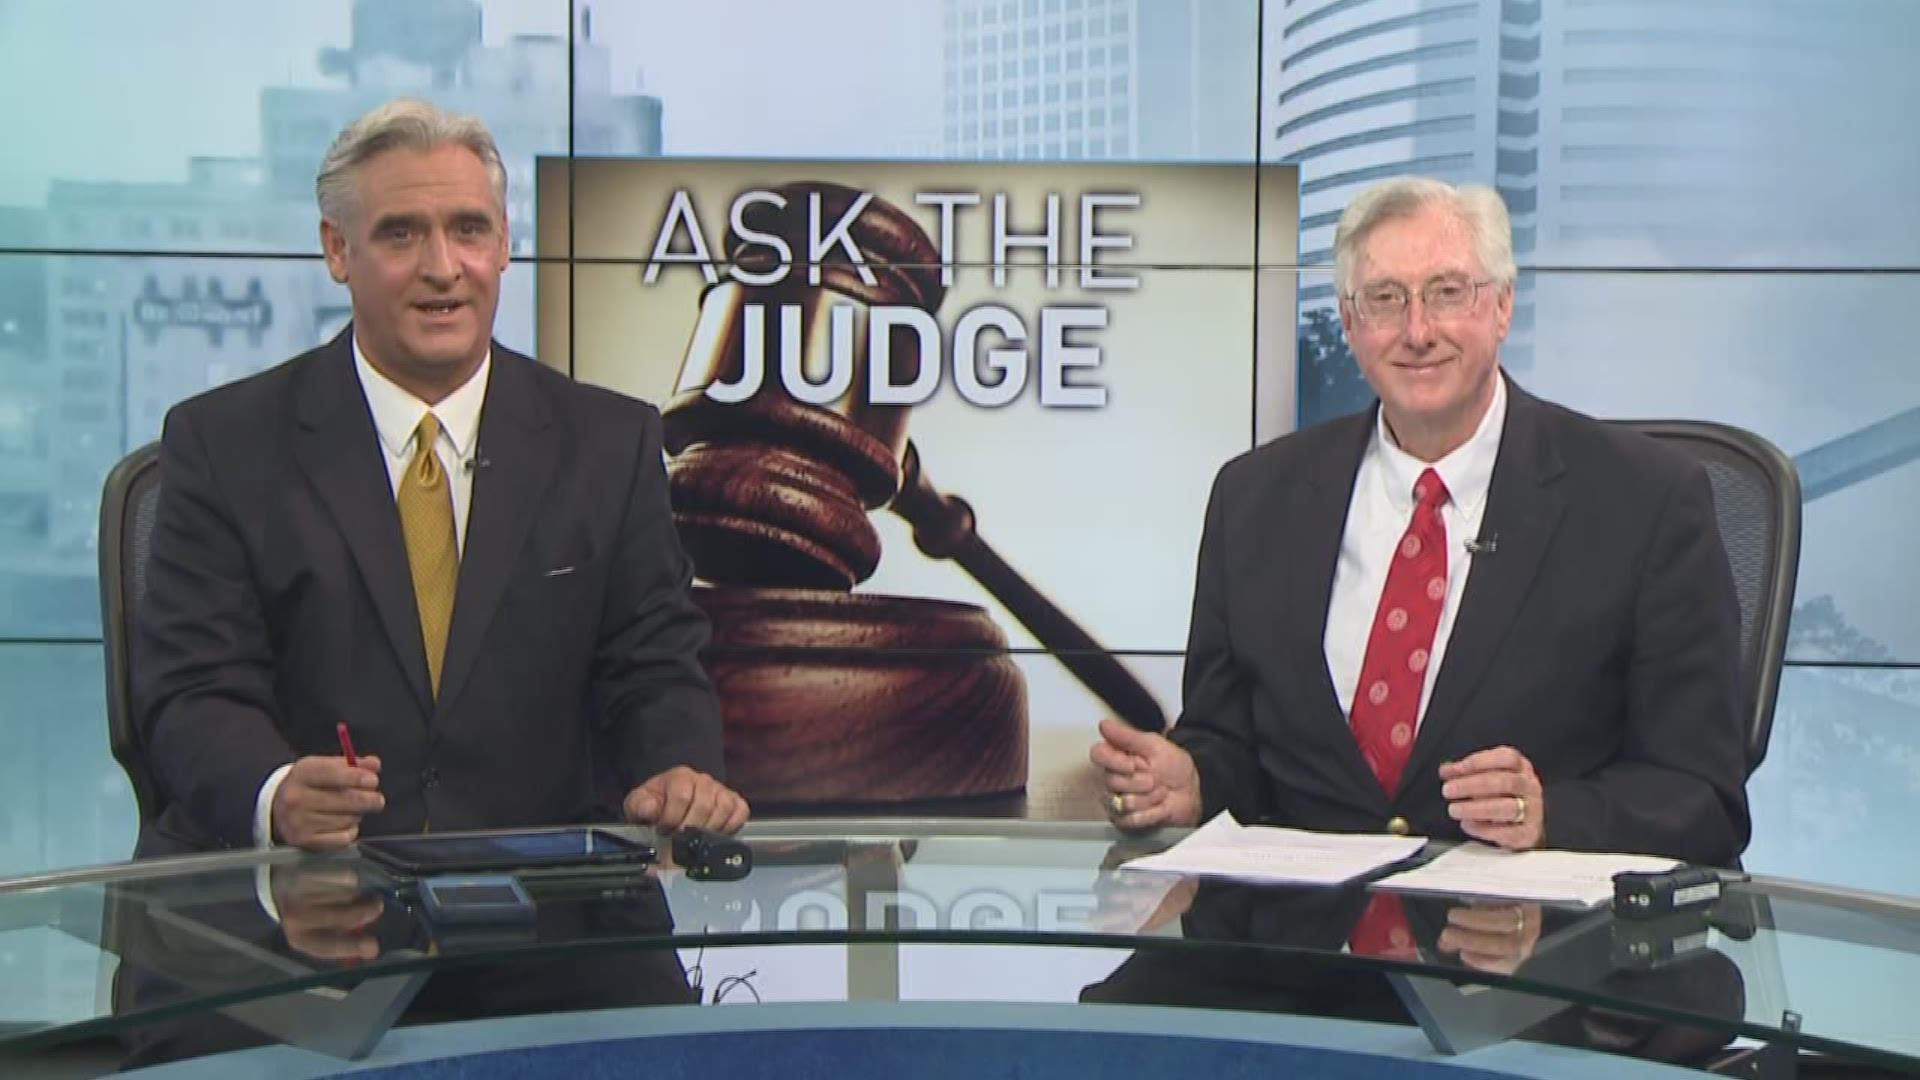 From trespassing questions, and leasing questions, Judge Larry Thorne has the answers. You can send Ask the Judge questions to 12news@12newsnow.com